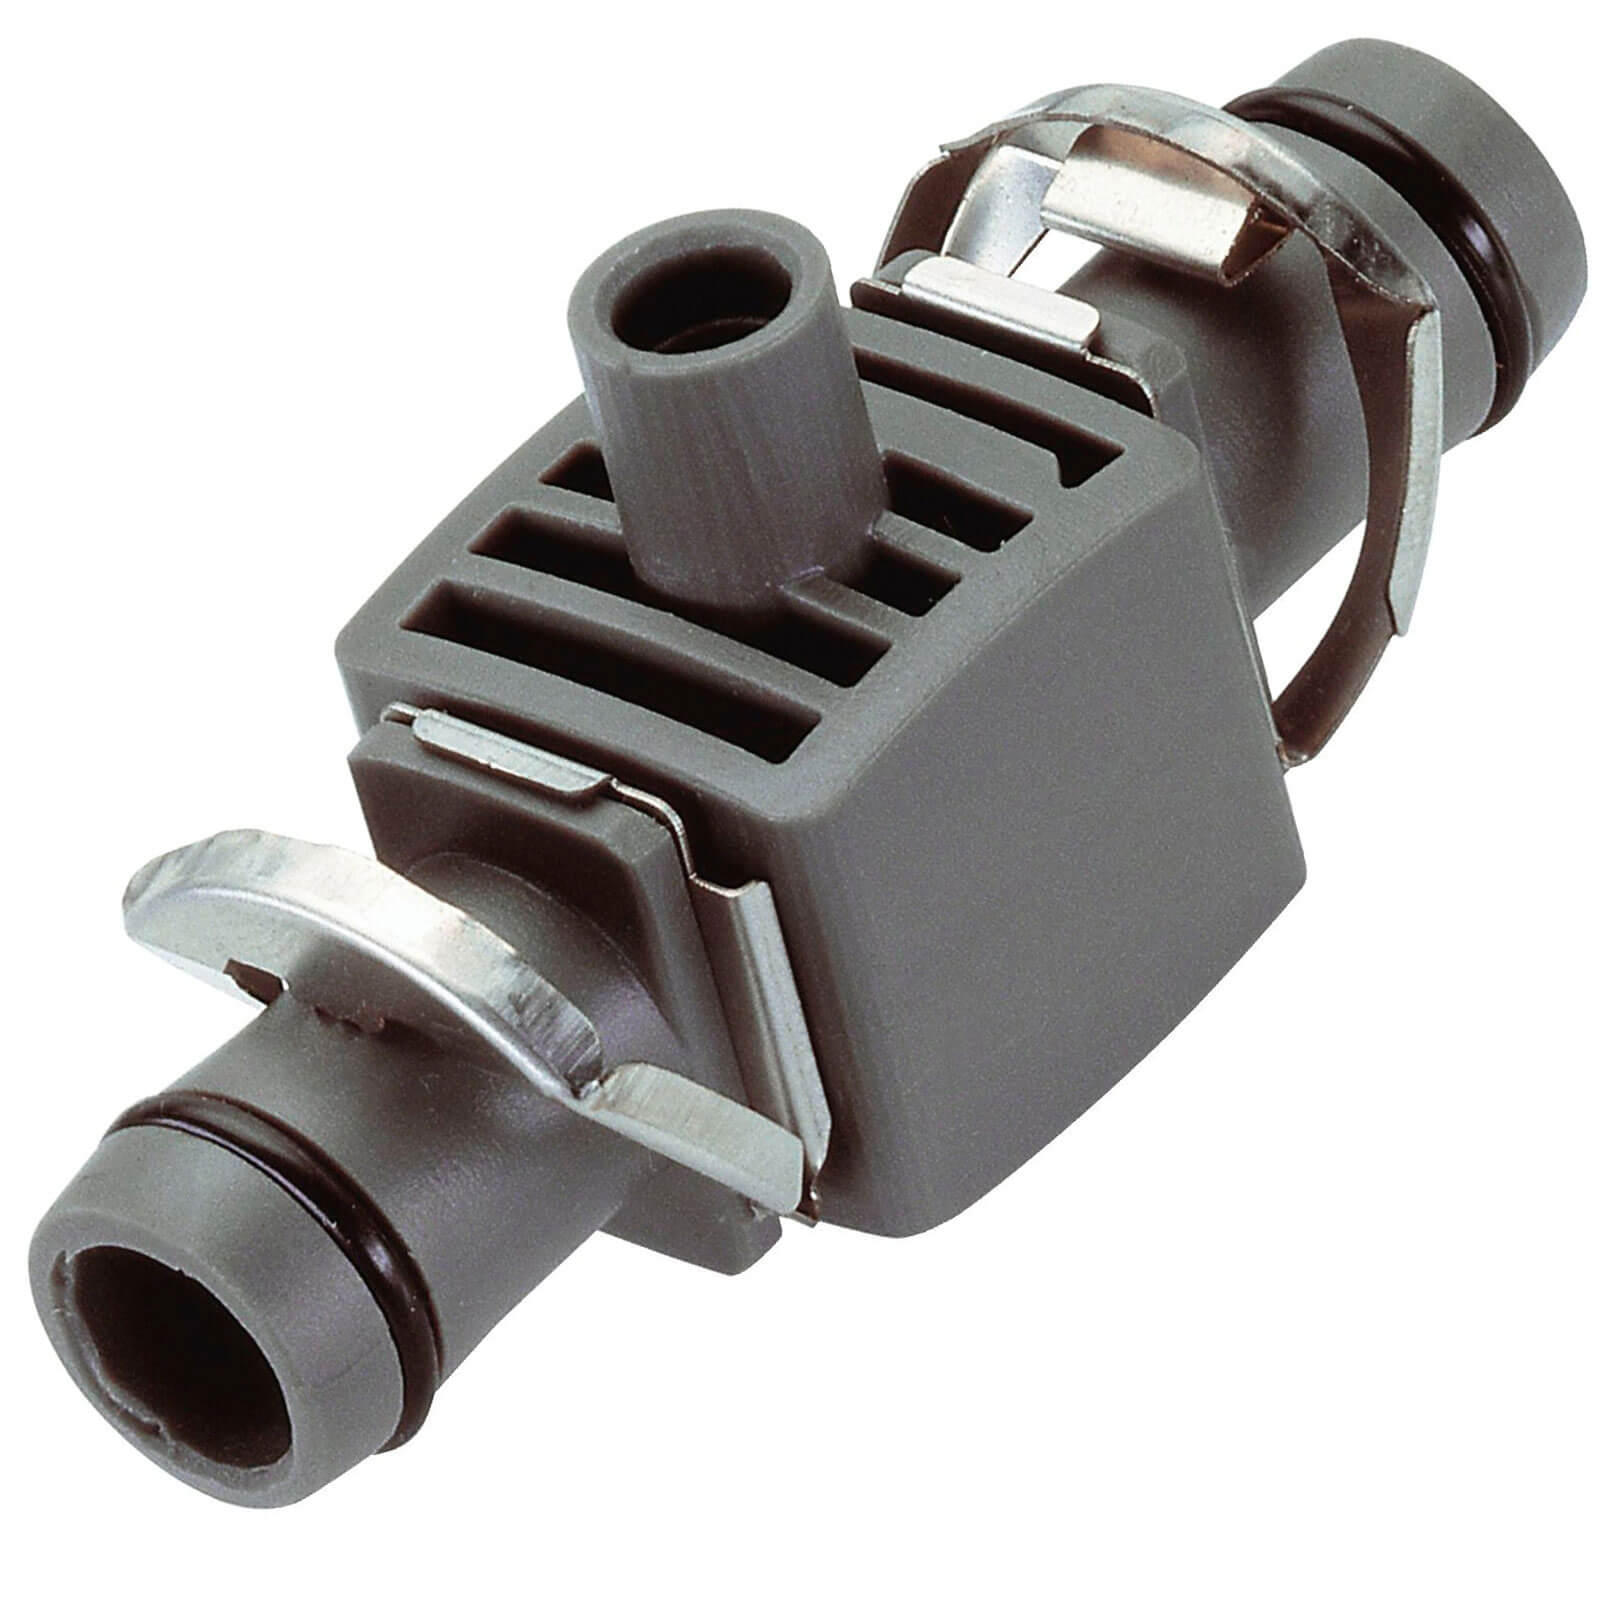 Image of Gardena MICRO DRIP T Joint Connector for Spray Nozzle 1/2" / 12.5mm Pack of 5